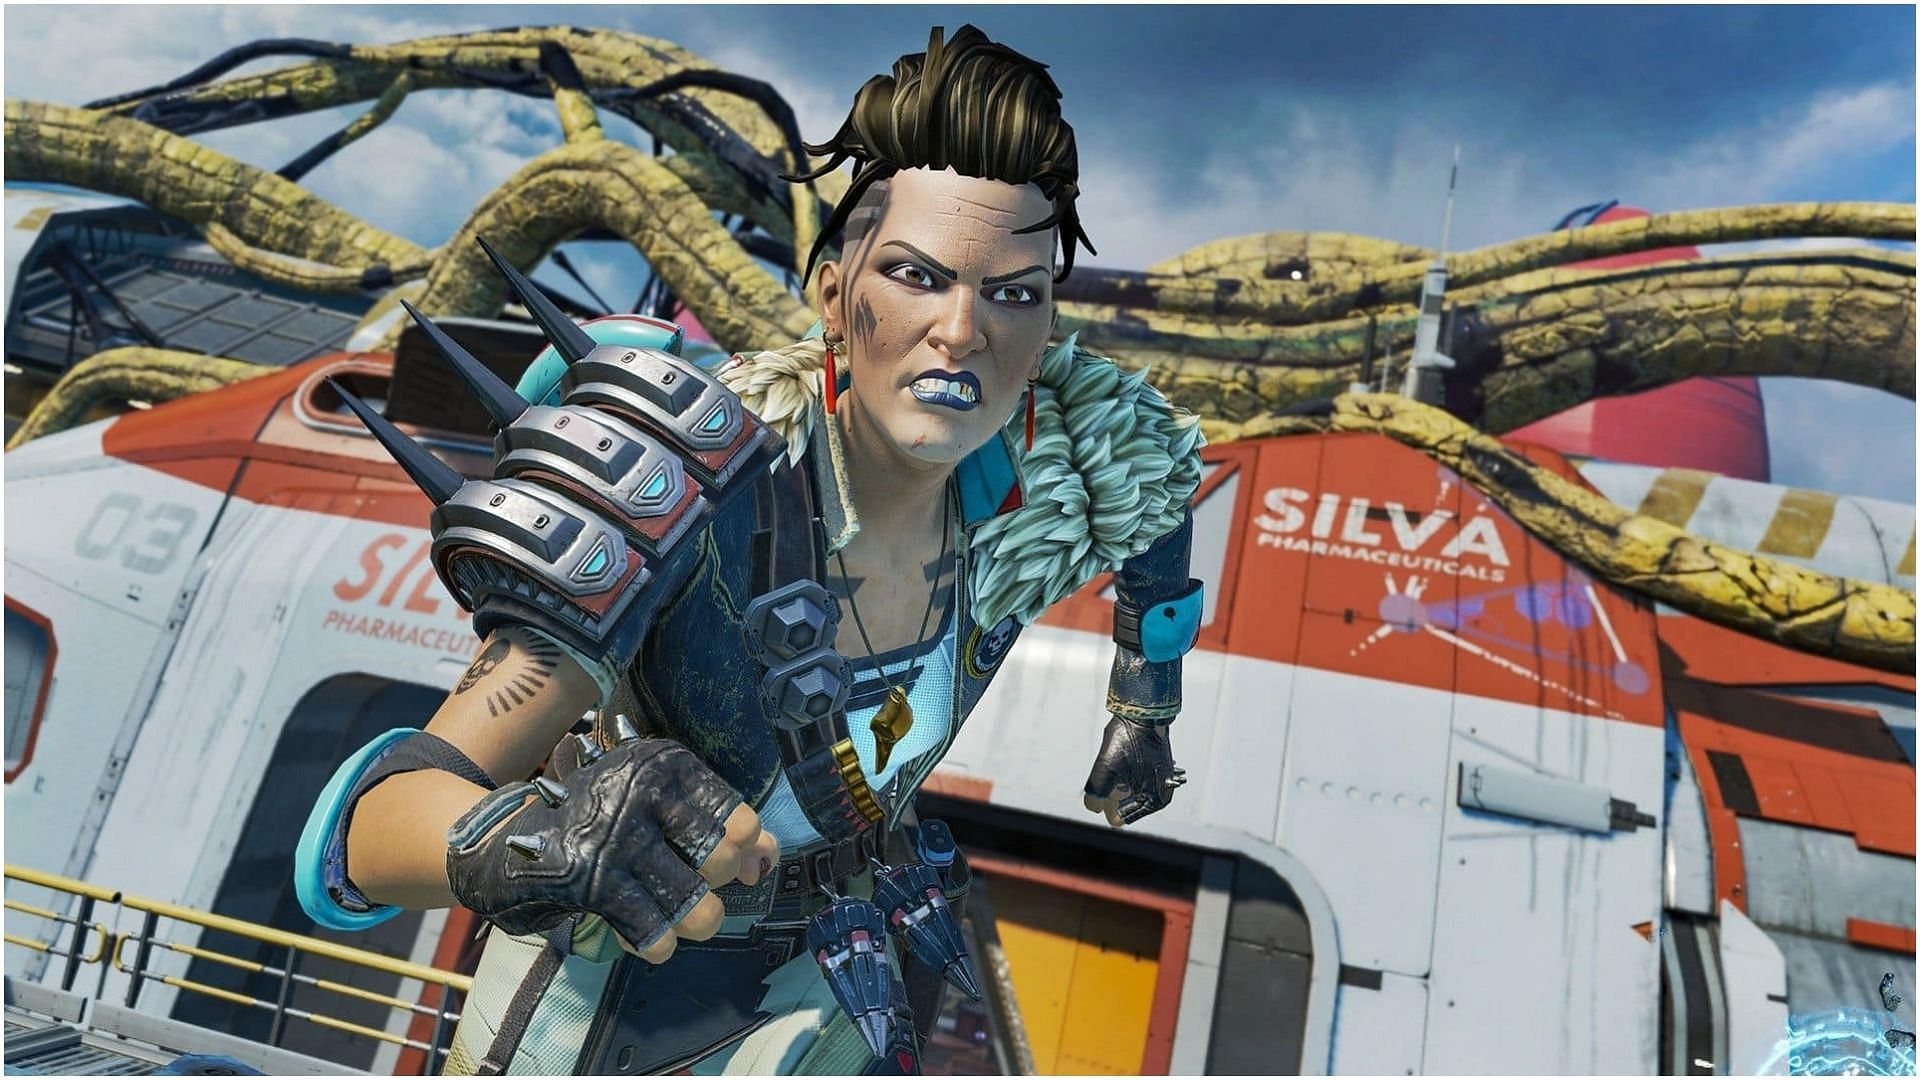 Matchmaking has been a massive problem this season in Apex Legends (Image via Respawn)